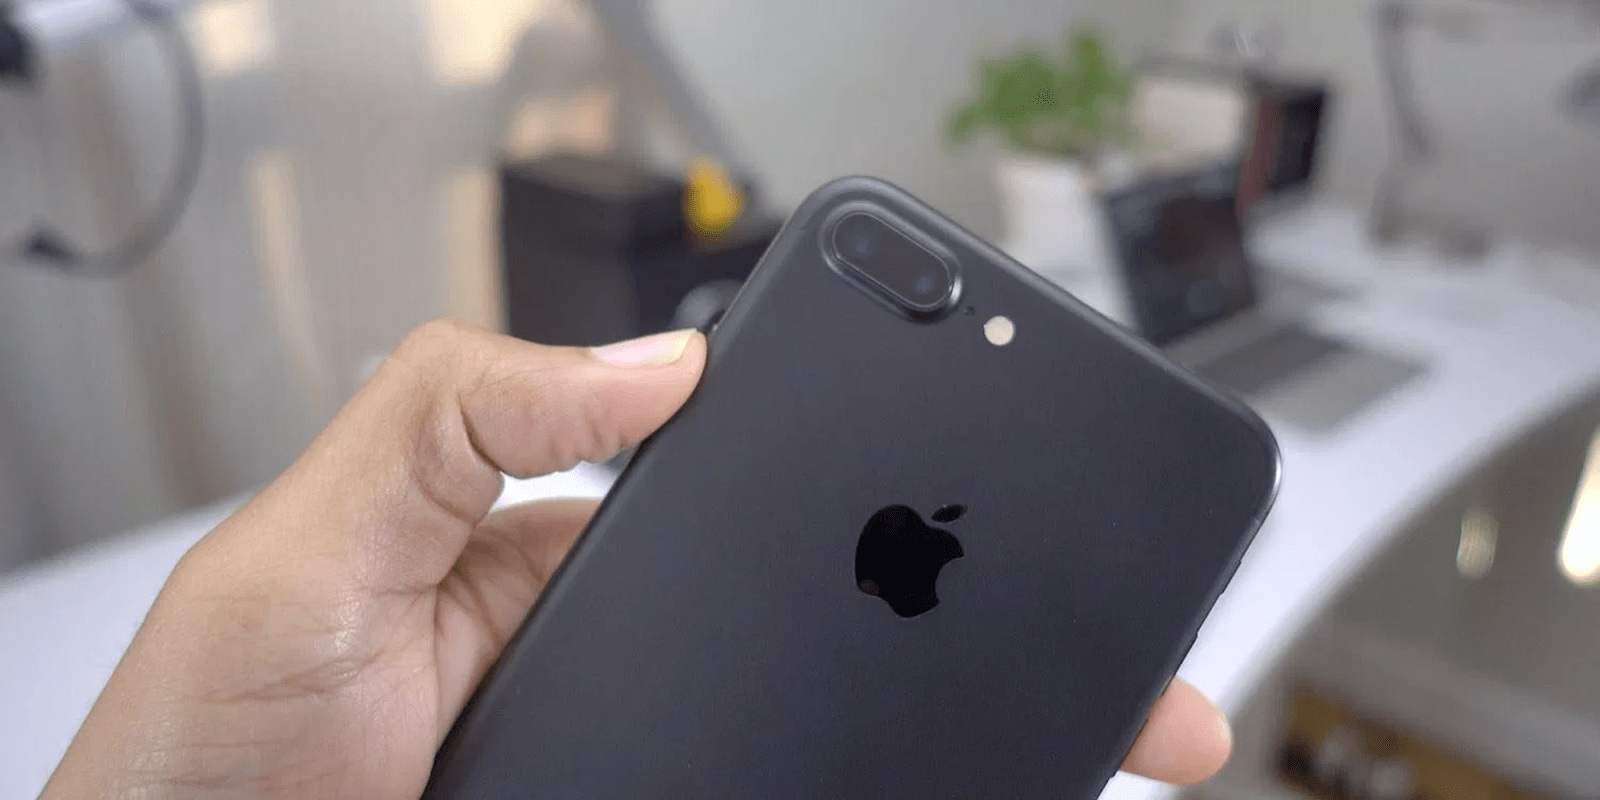 PSA: You could get up to $349 from Apple if you owned an iPhone 7